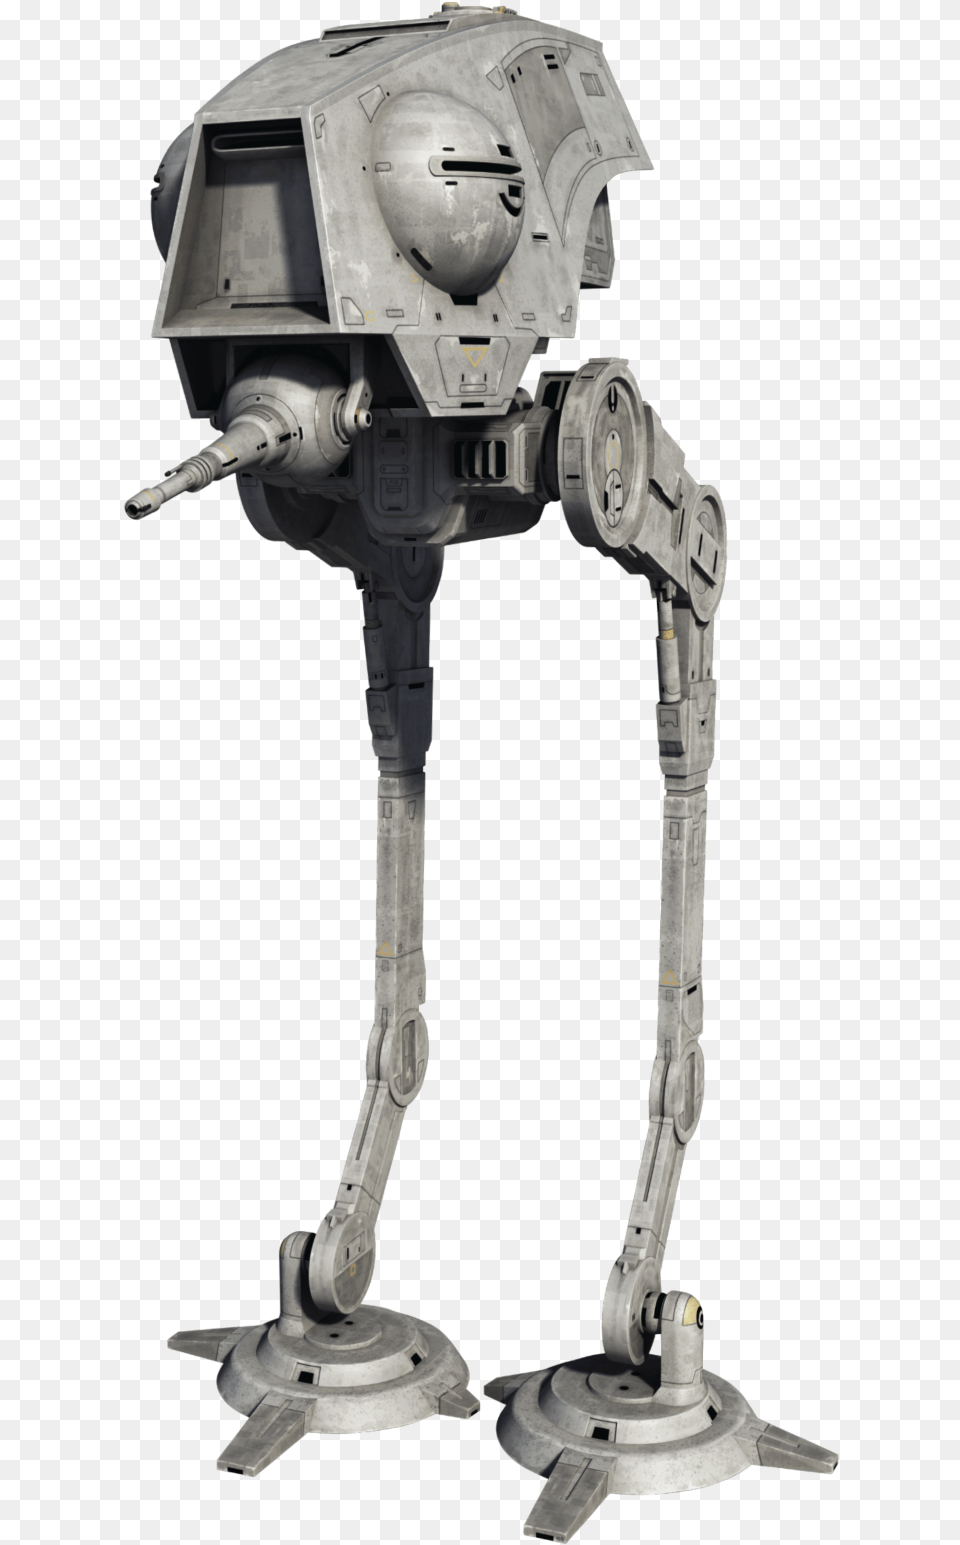 Premium Eras Canon Walker Star Wars, Robot, Device, Power Drill, Tool Png Image